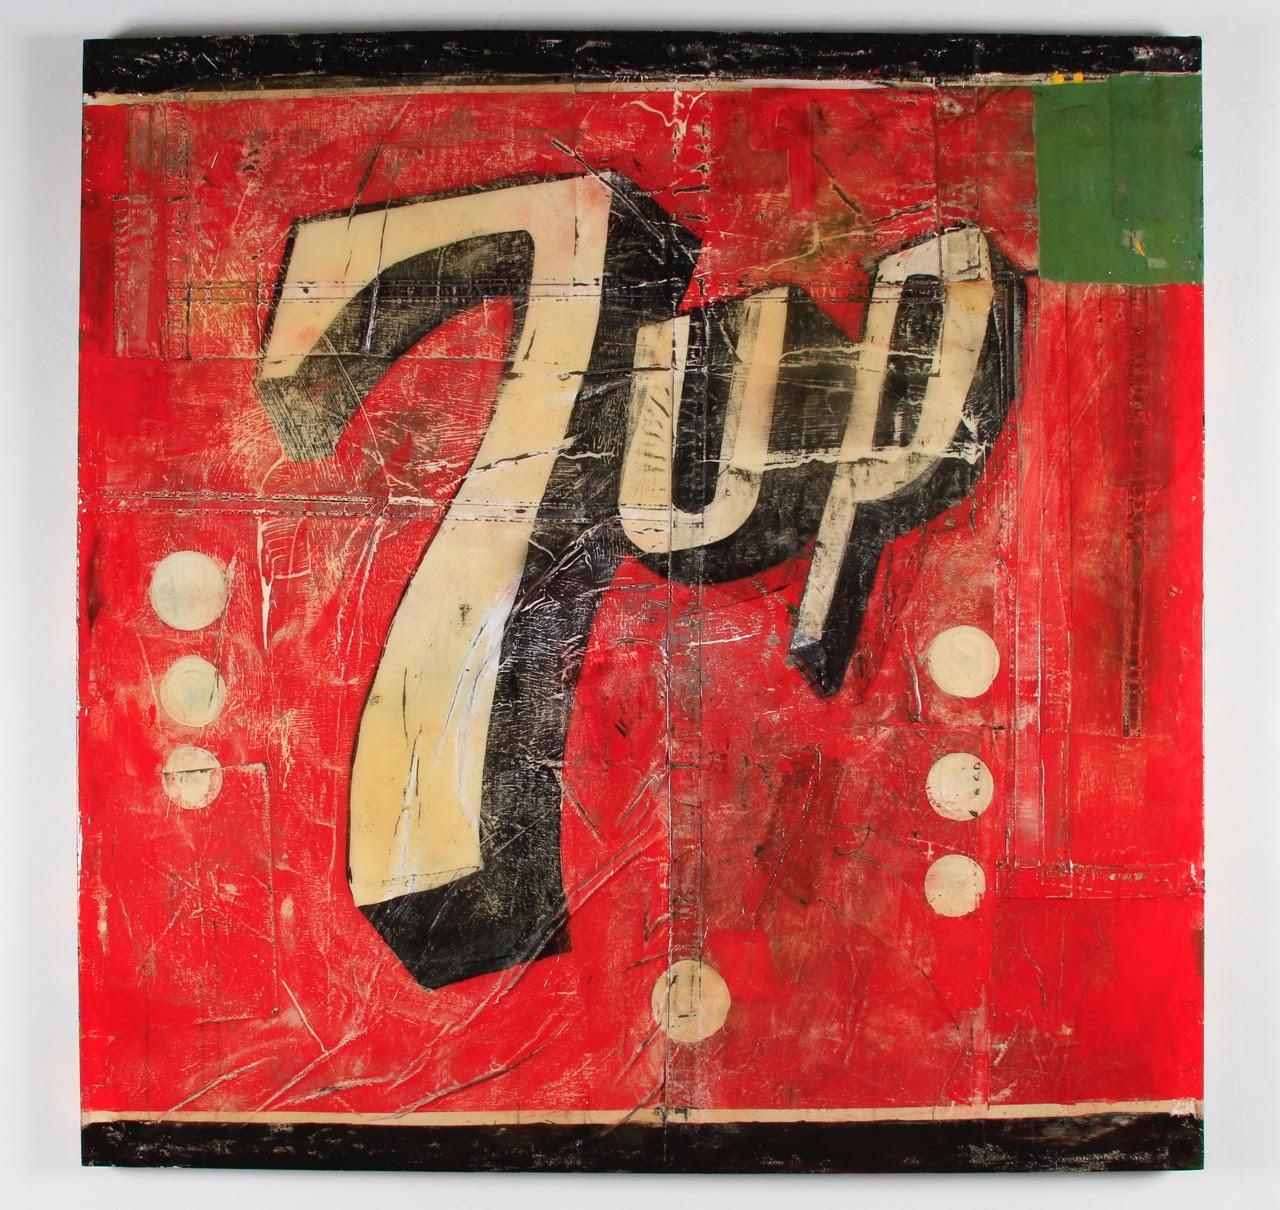 7up - Other Art Style Mixed Media Art by Greg Miller